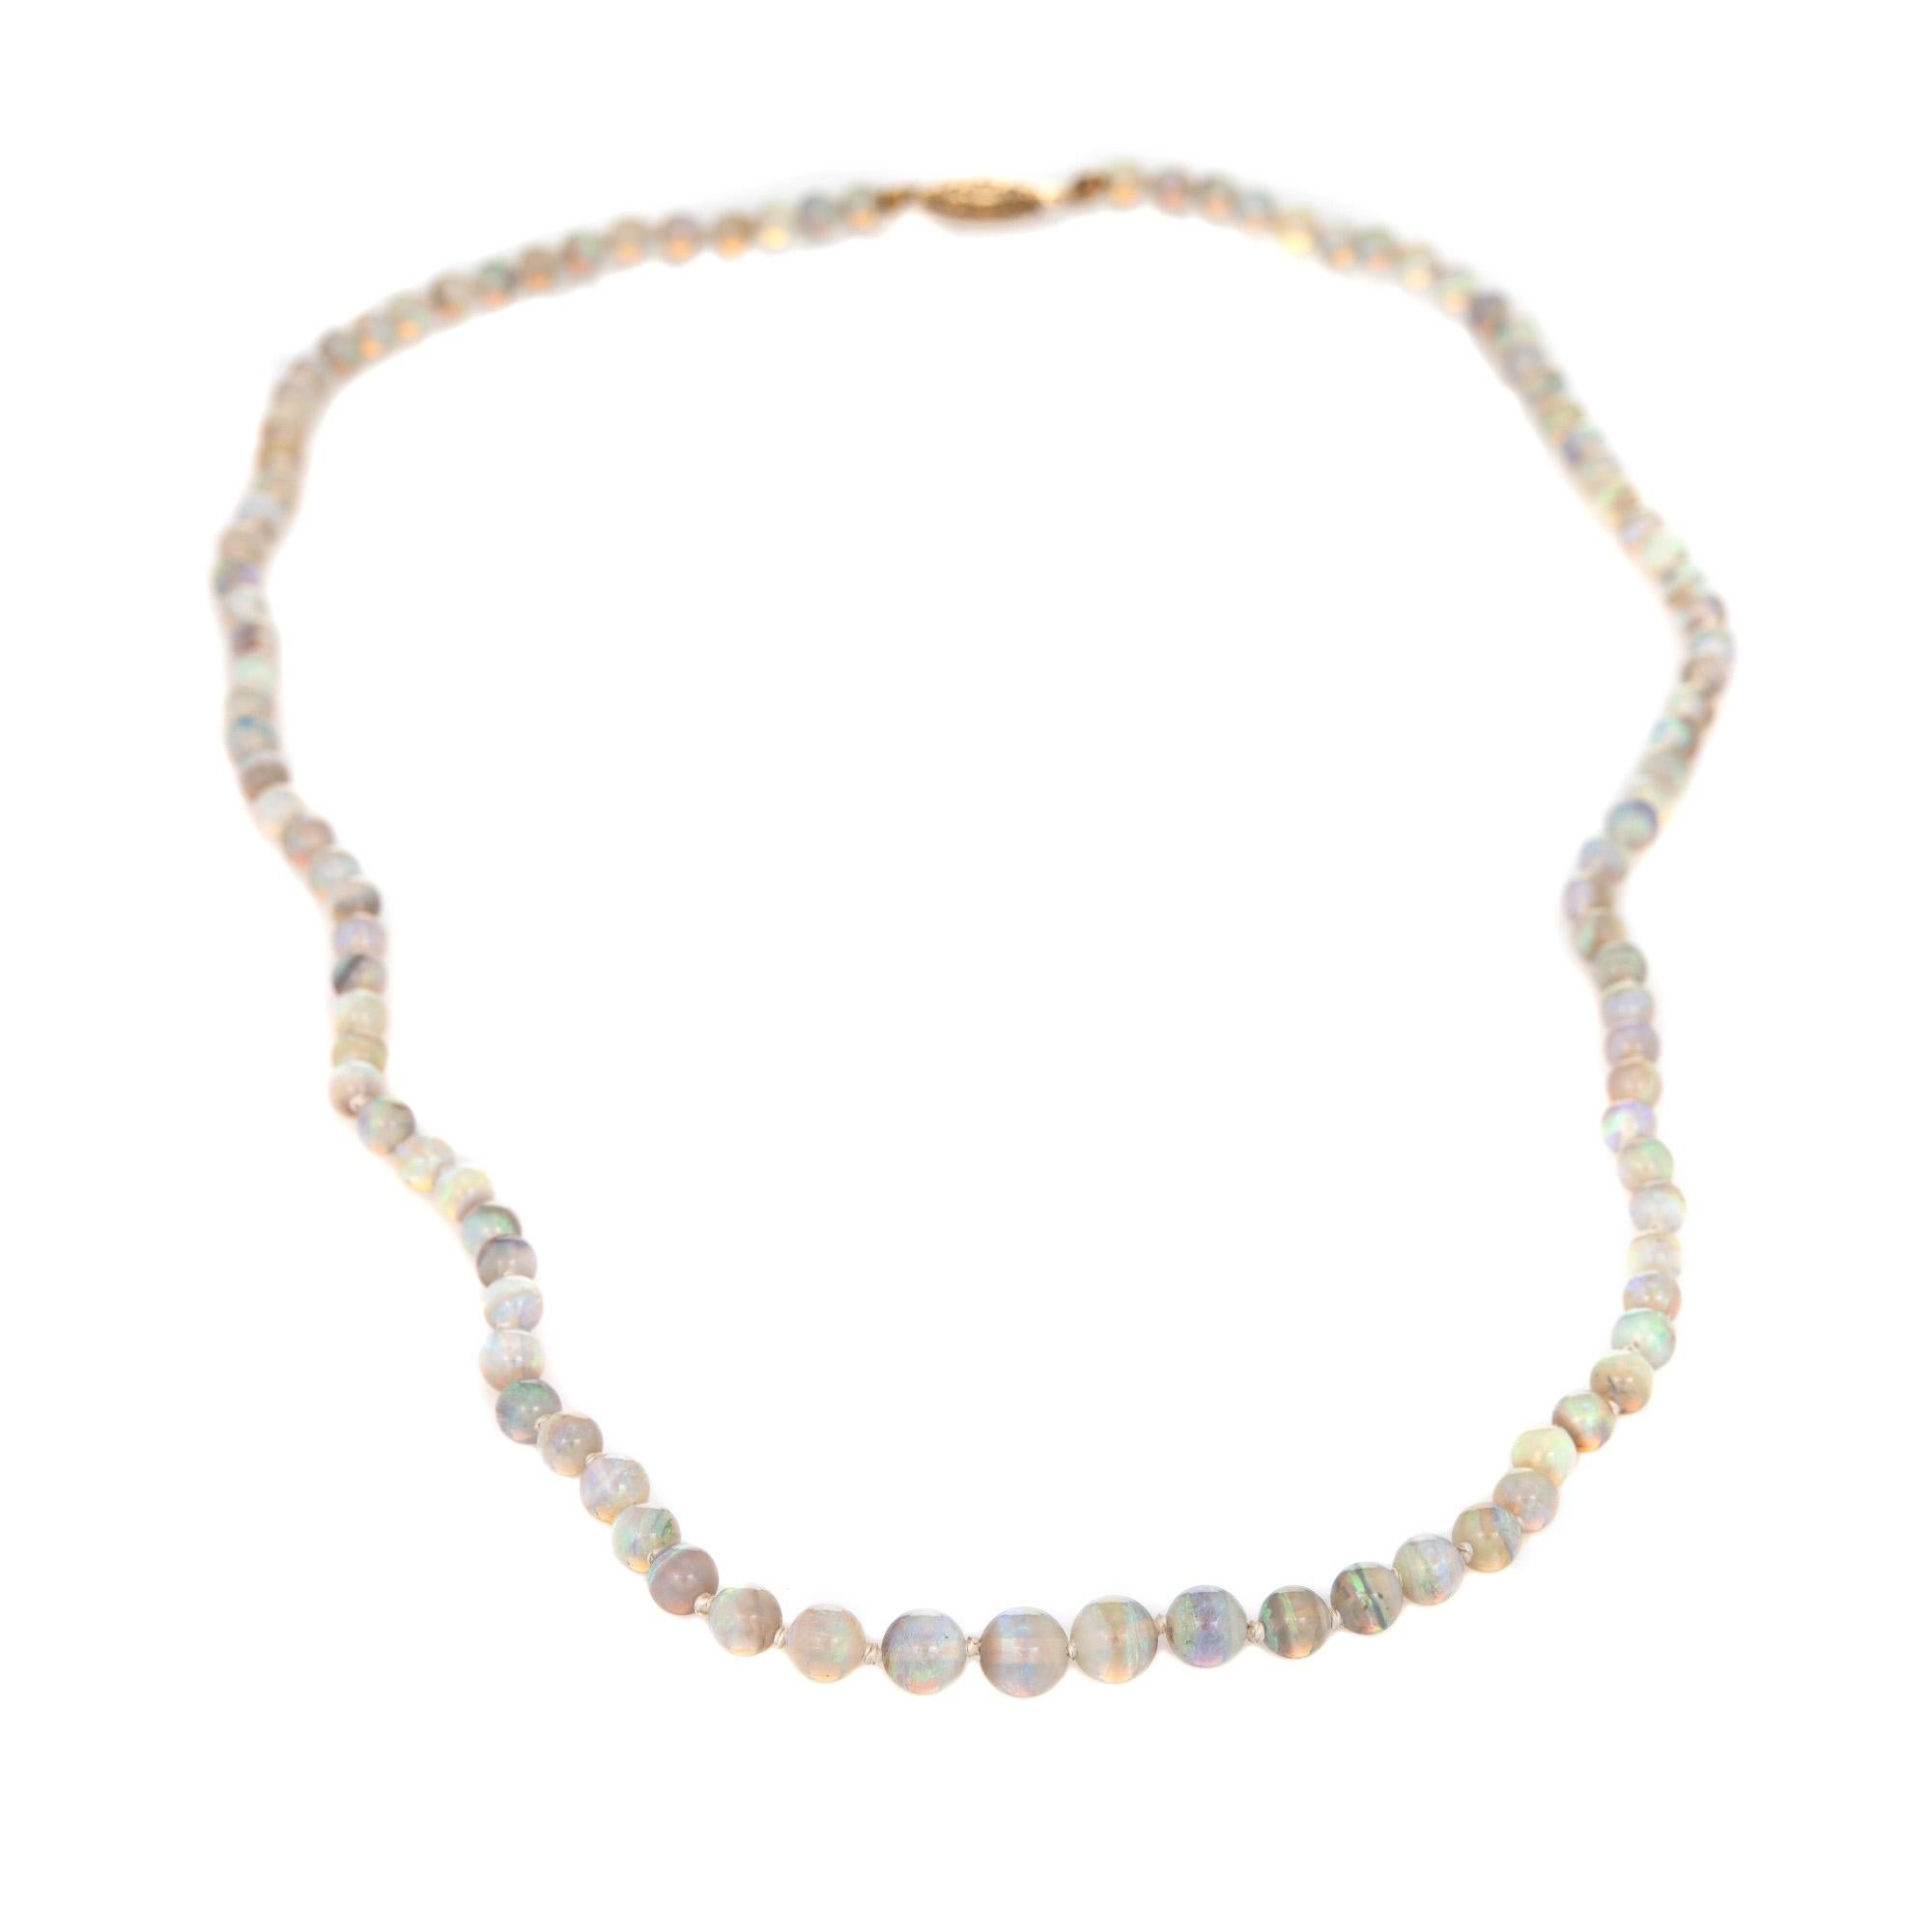 Stylish and finely detailed vintage natural opal bead necklace finished with a 14k yellow gold clasp.  

The opals beads graduate in size from 3.5mm to 6mm. The opals are in excellent condition and free or cracks or chips.
The opal beads graduate in